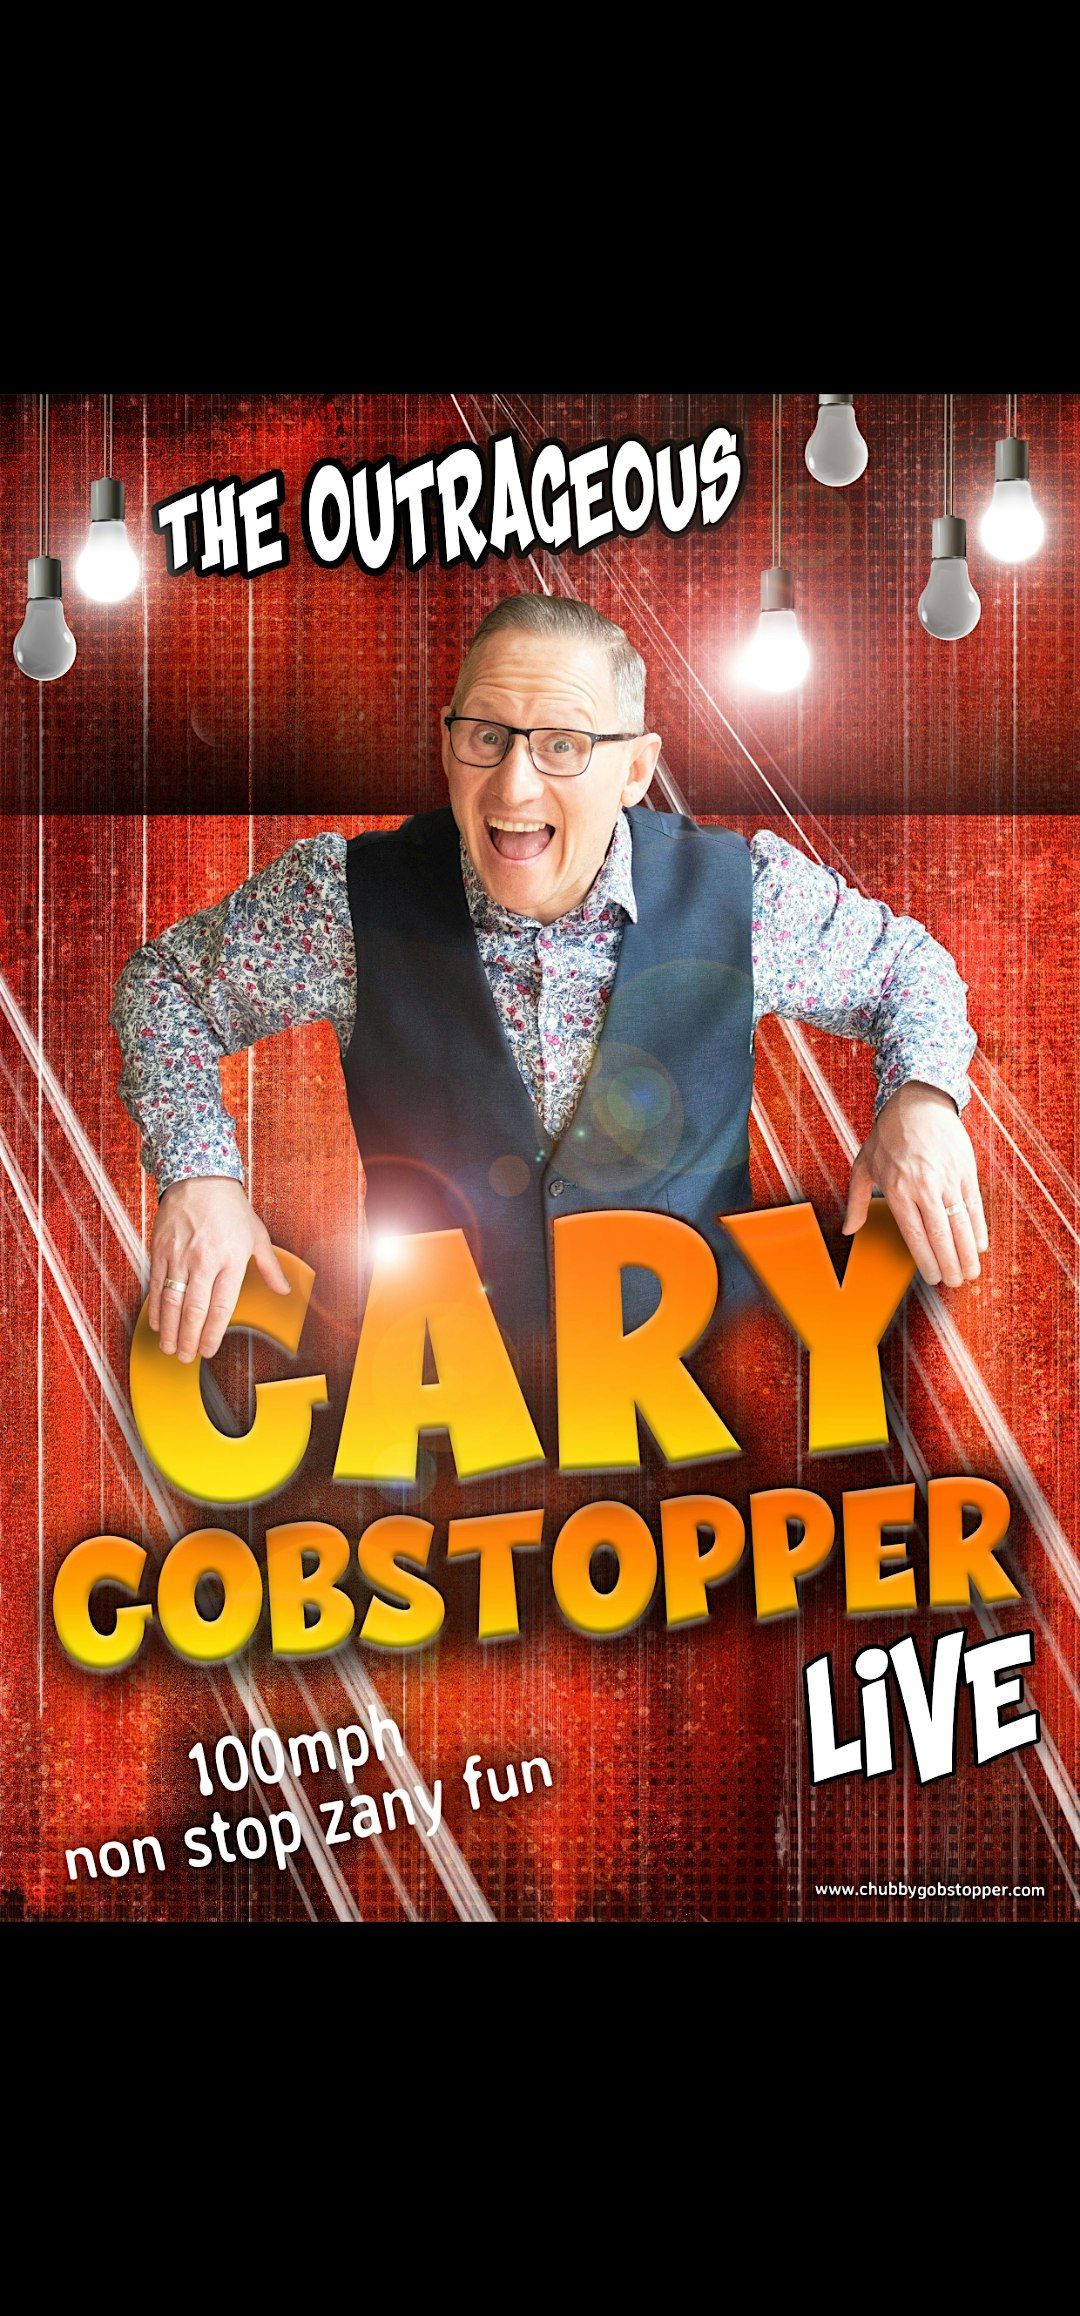 The OUTRAGEOUS Gary Gobstopper